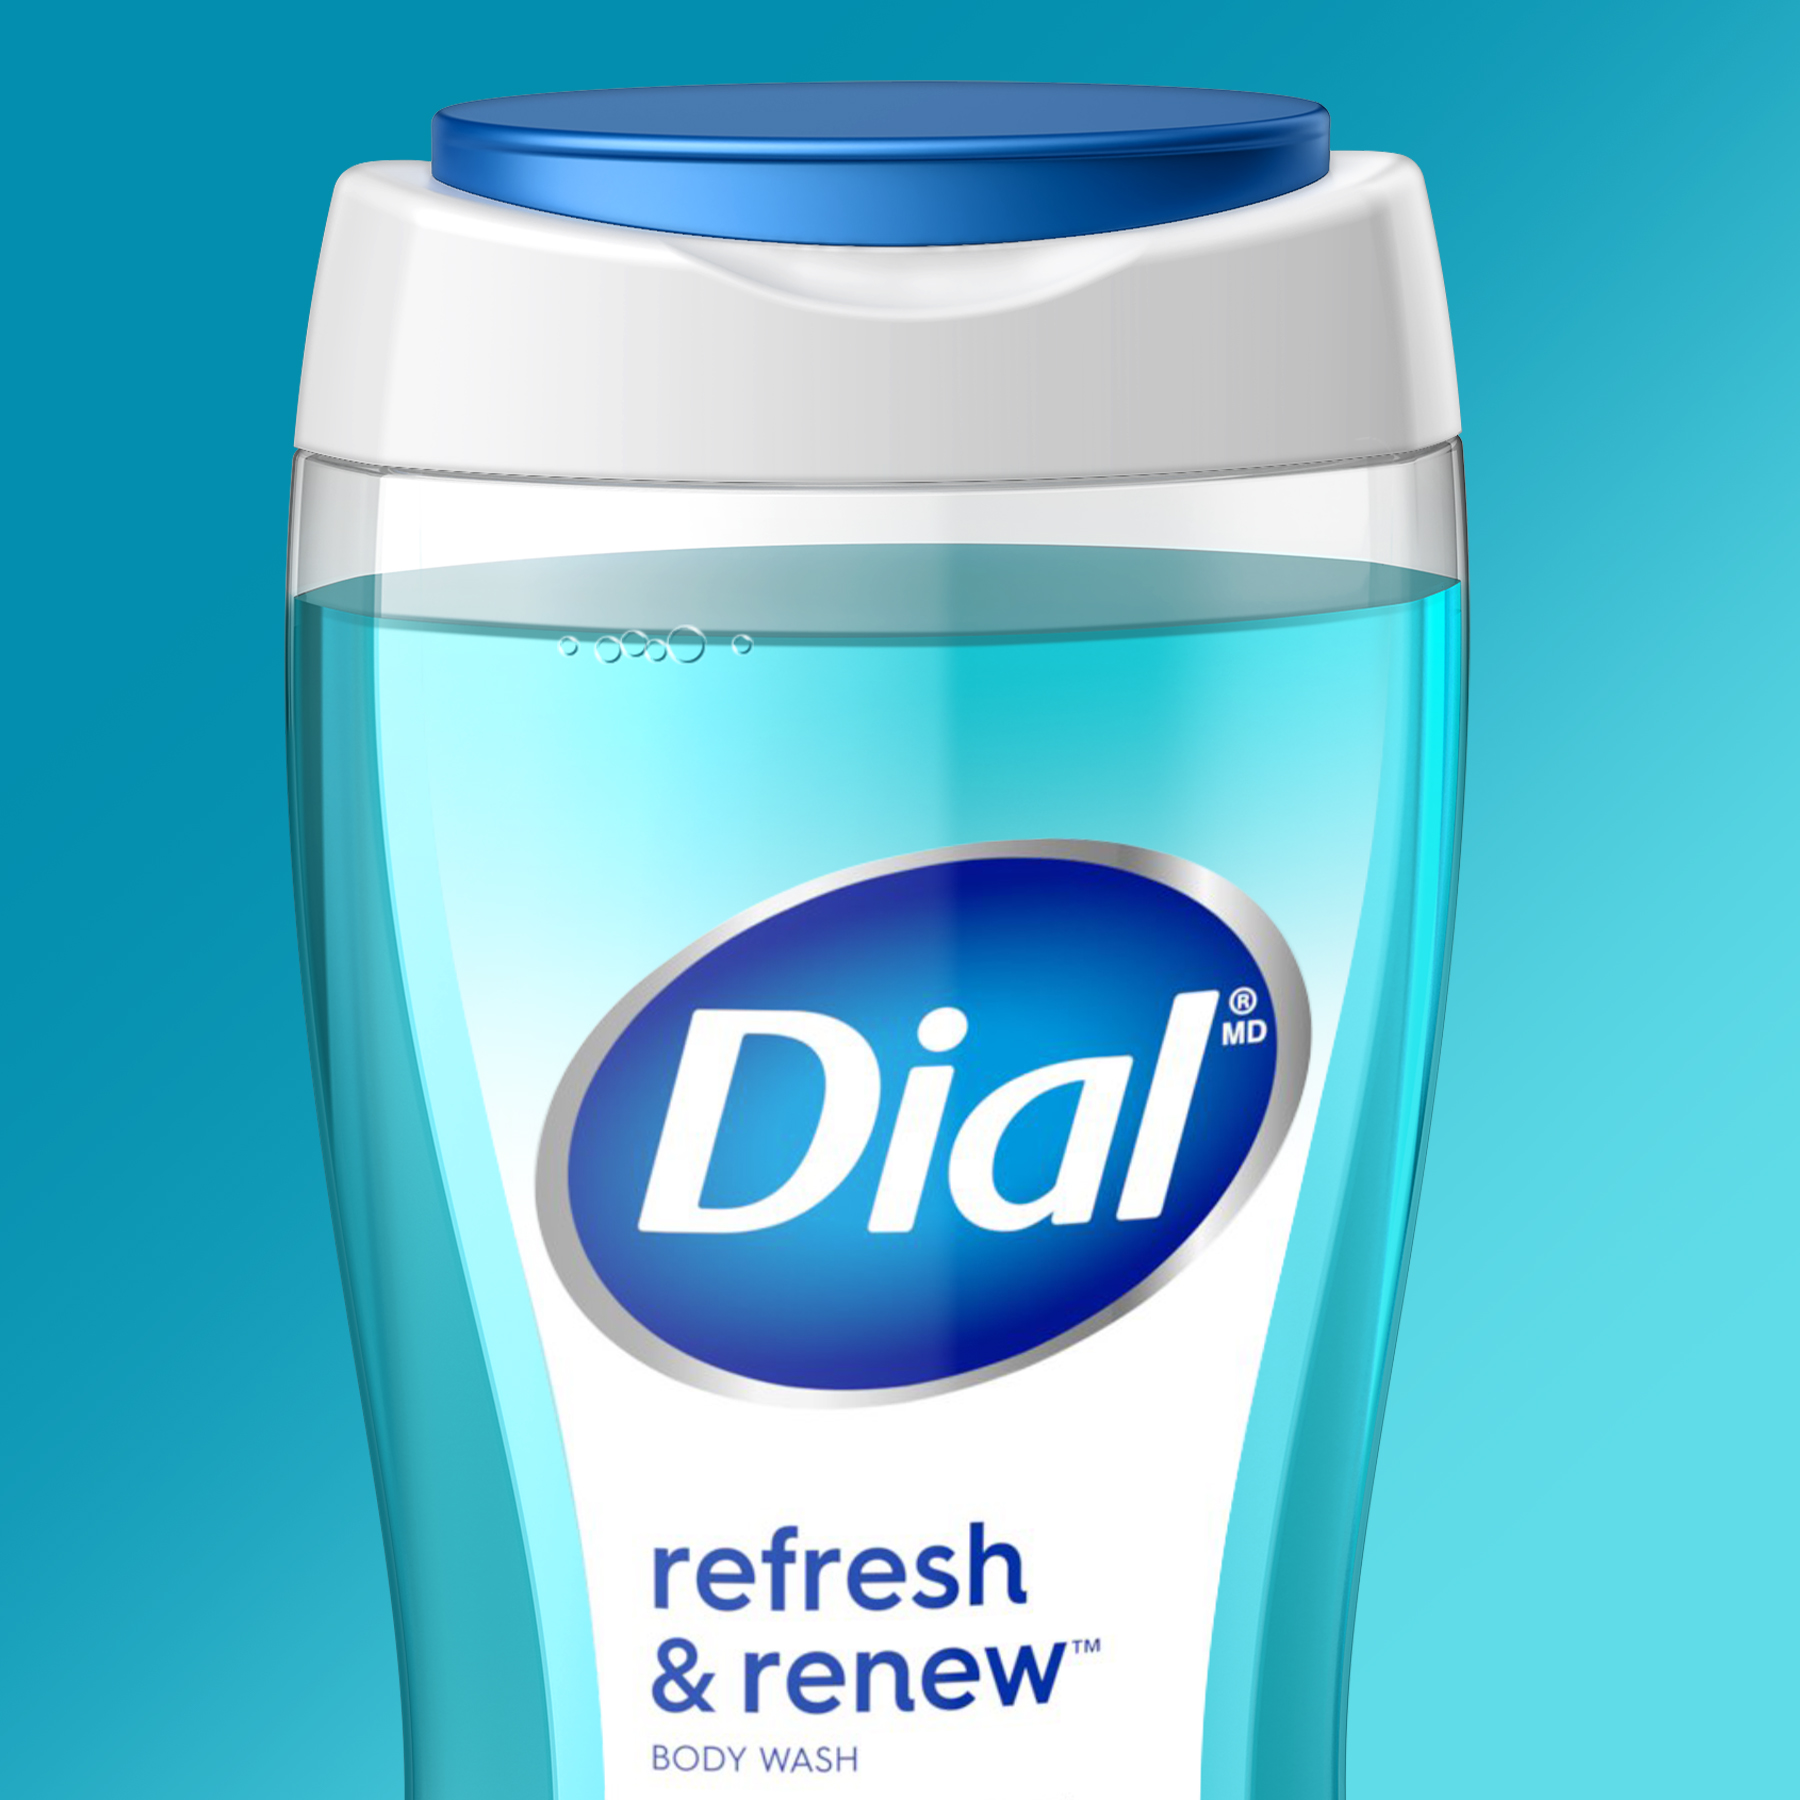 photo of the Dial body wash package design